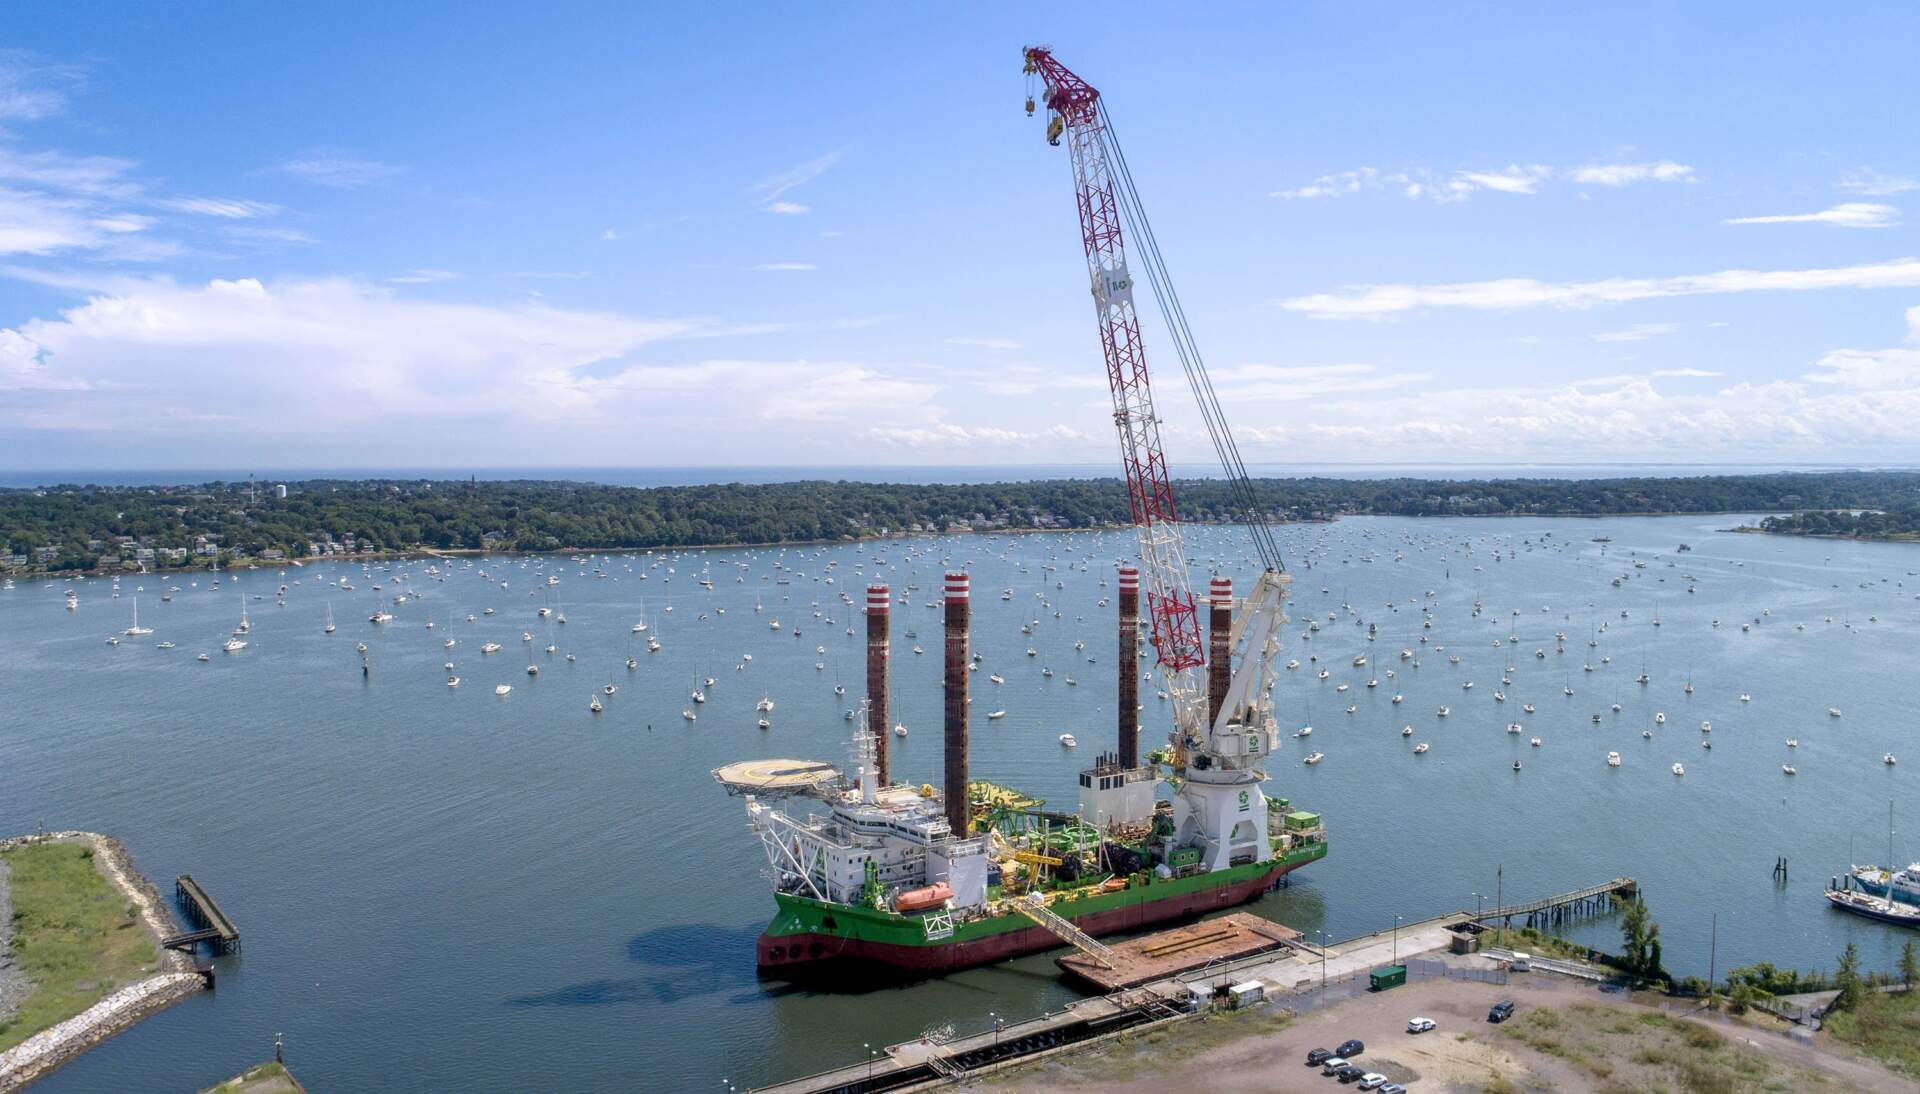 The &quot;Sea Installer&quot; stopped in Salem Harbor before heading out to the ocean near Martha's Vineyard, where it will install 62 massive wind turbines for Vineyard Wind. (Robin Lubbock/WBUR)